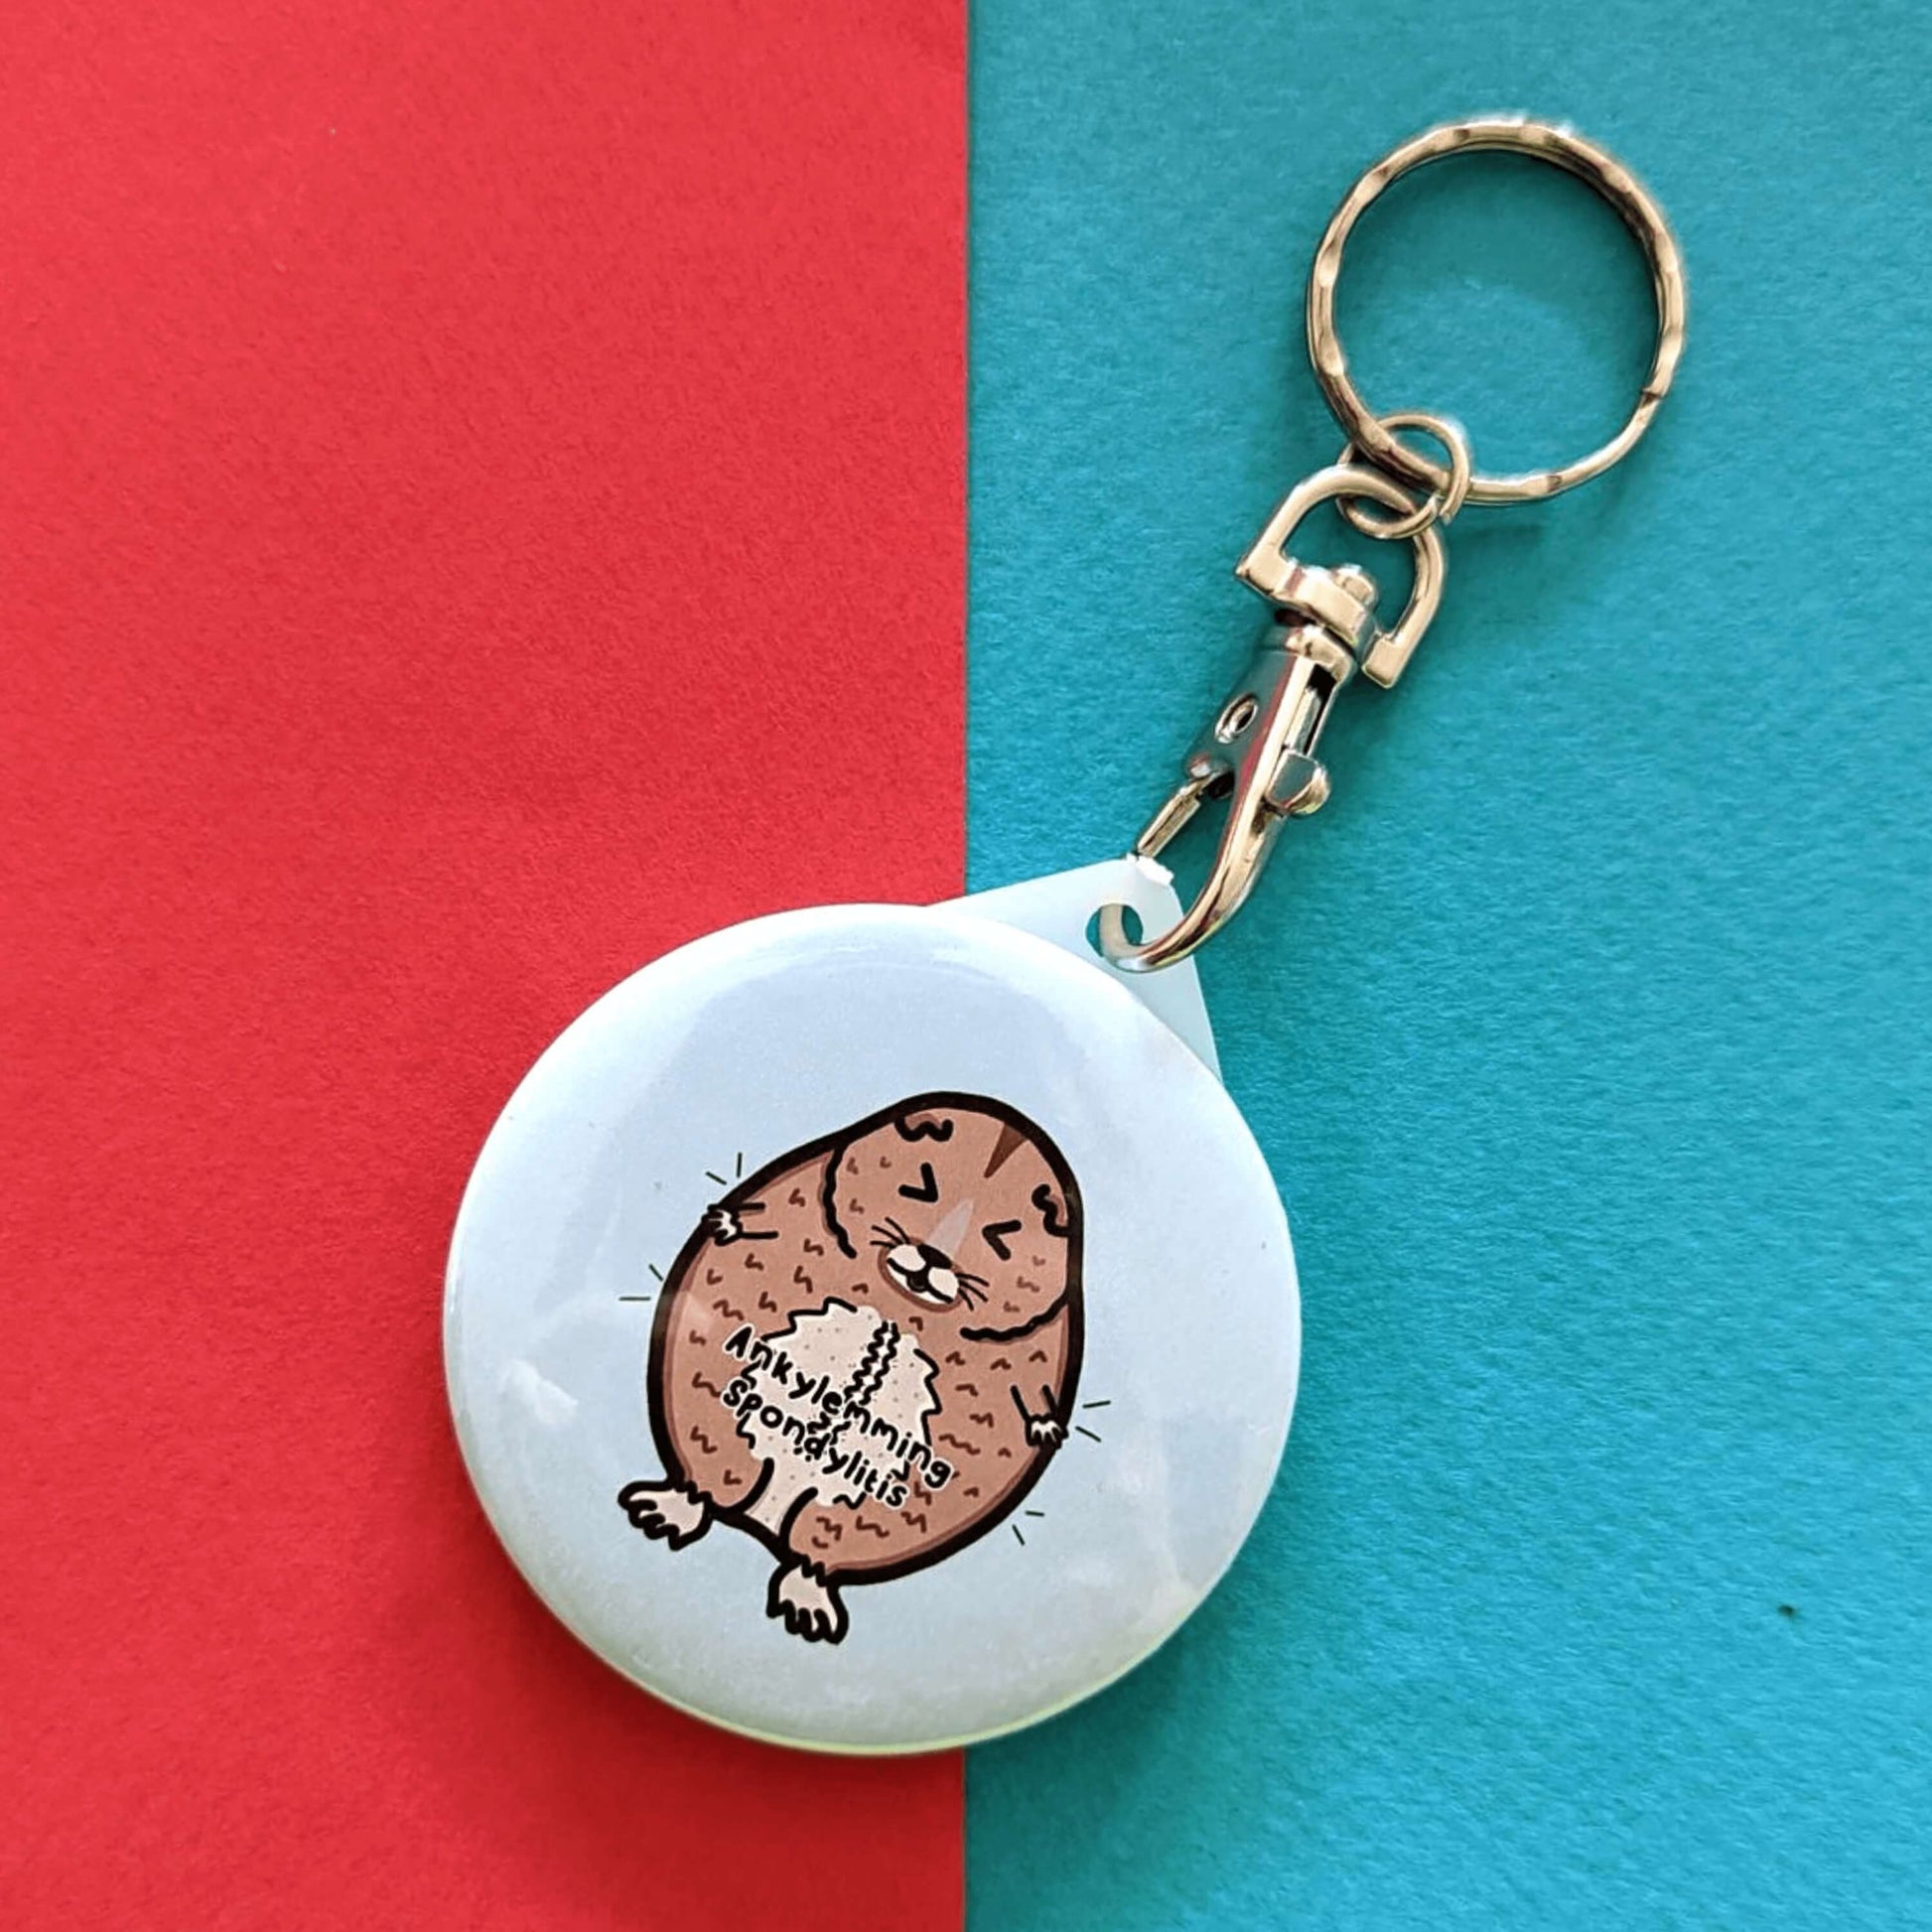 The Ankylemming - Ankylosing Spondylitis Keyring, a stressed lemming with its eyes scrunched shut on a white background circle keychain with the text ankylemming spondylitis being held up by a silver lobster clip on a blue and red background. Raising awareness for Ankylosing Spondylitis.